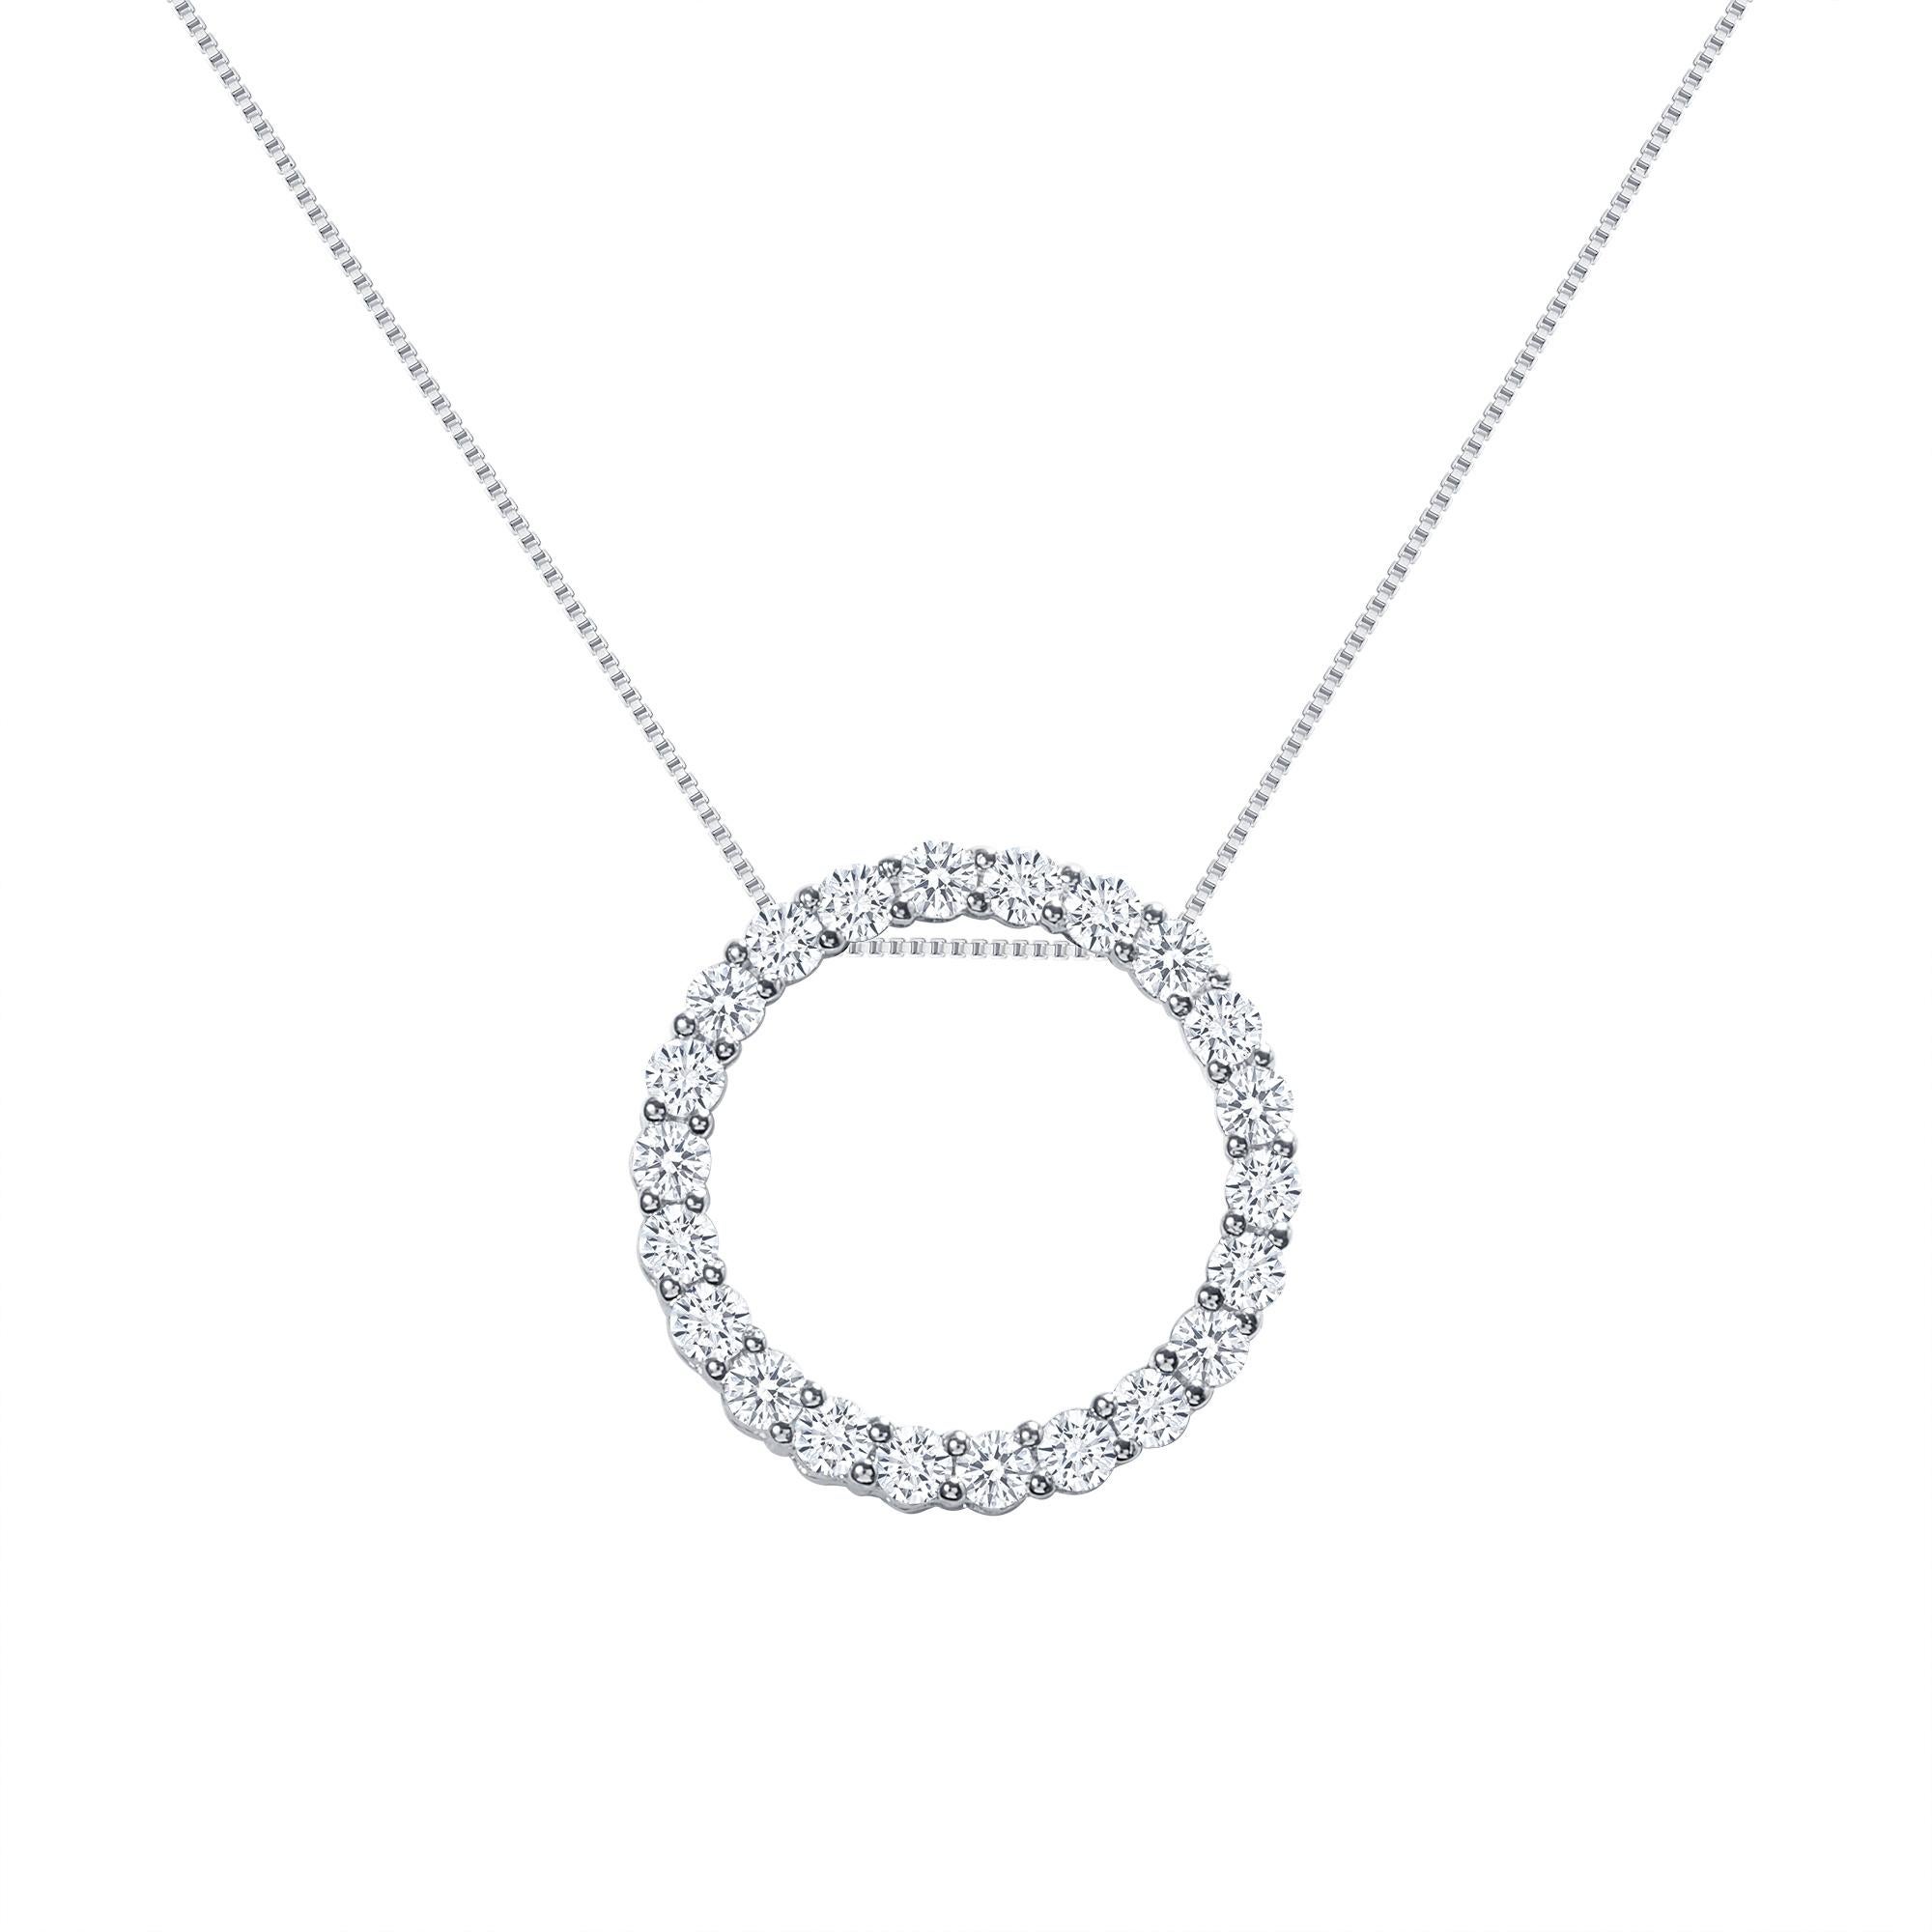 This diamond circle pendant provides a glowing chic look.
Metal: 14k Gold
Diamond Total Carats: 2 carat
Diamond Cut: Round Natural Diamonds (Not Lab Grown)
Diamond Clarity: VS
Diamond Color: F-G
Color: White Gold
Necklace Length: 14 inches